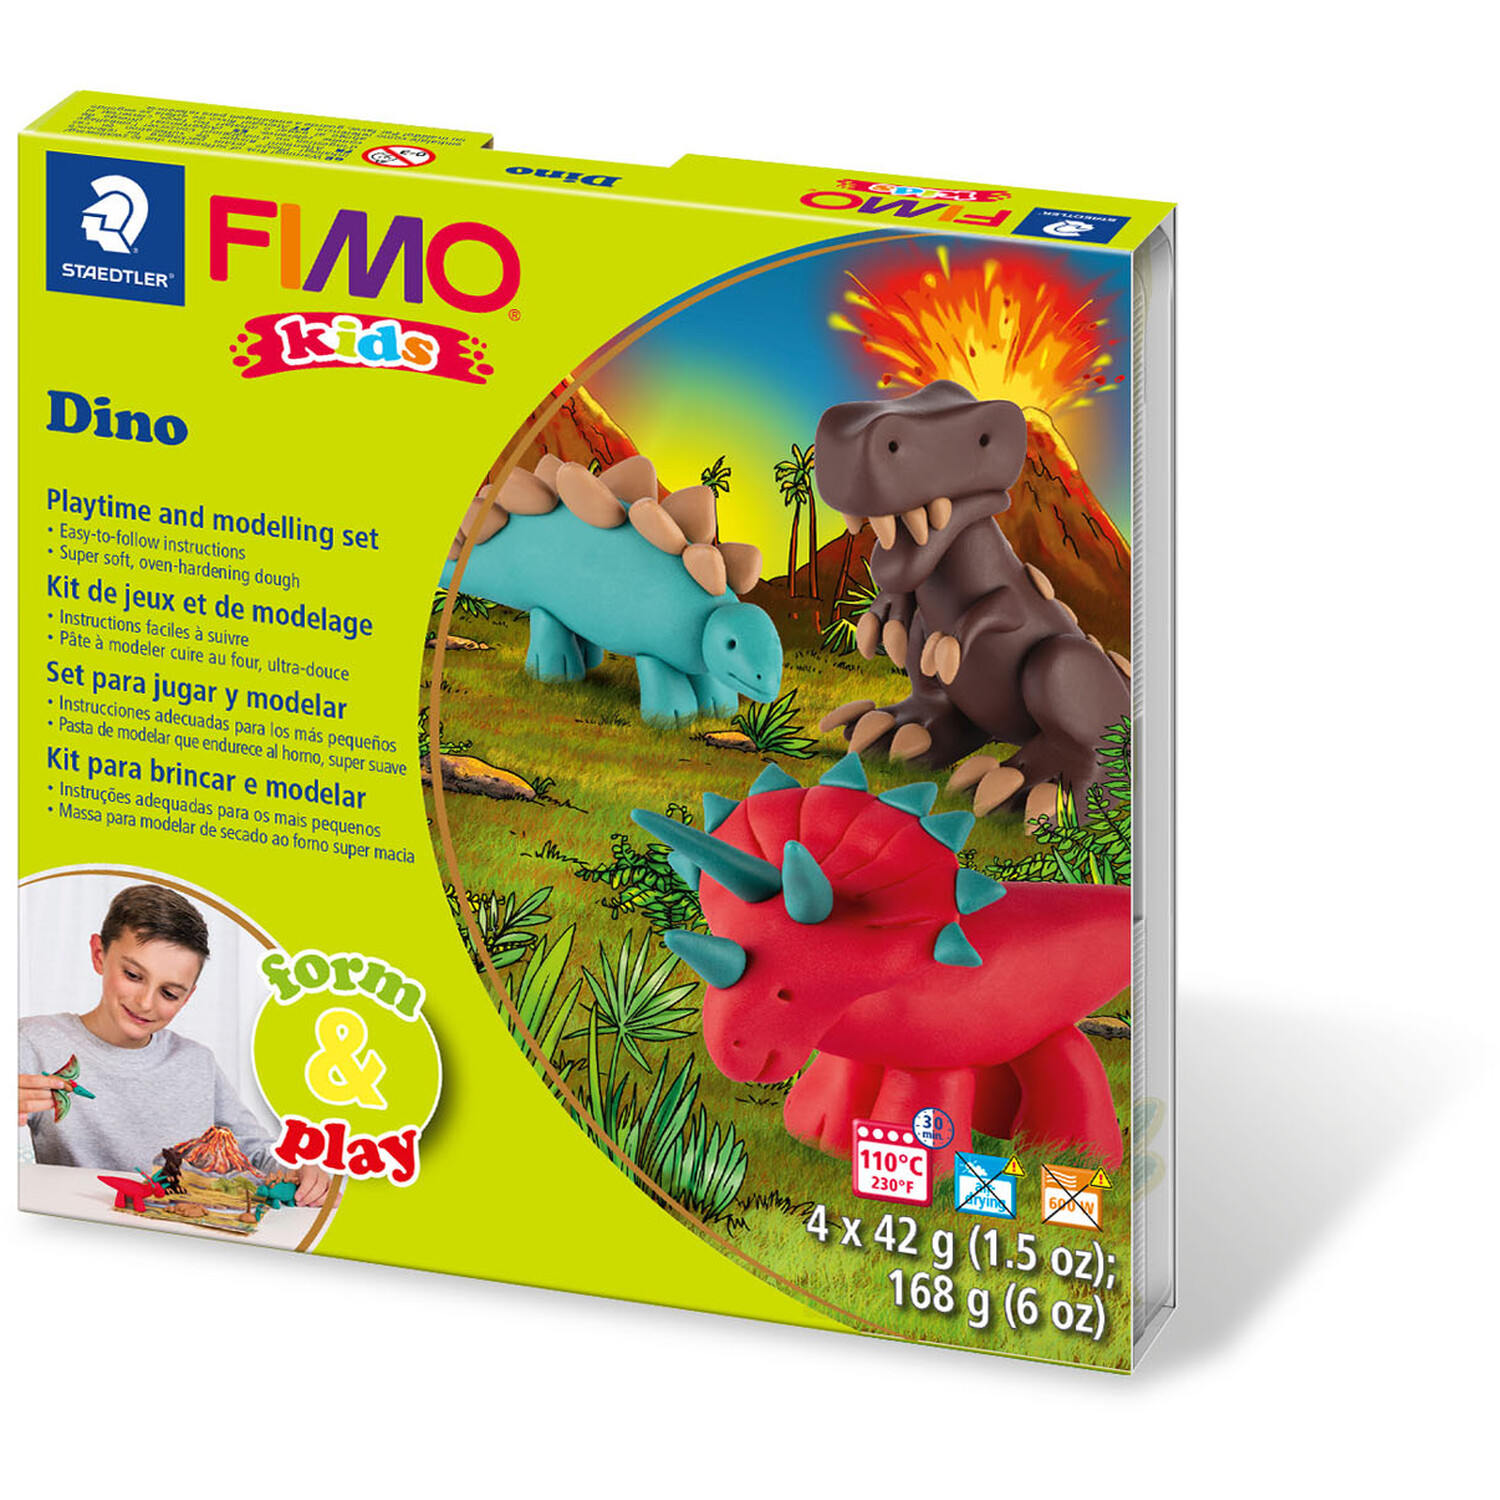 Staedtler Fimo Form and Play Dino Modelling Clay Set Image